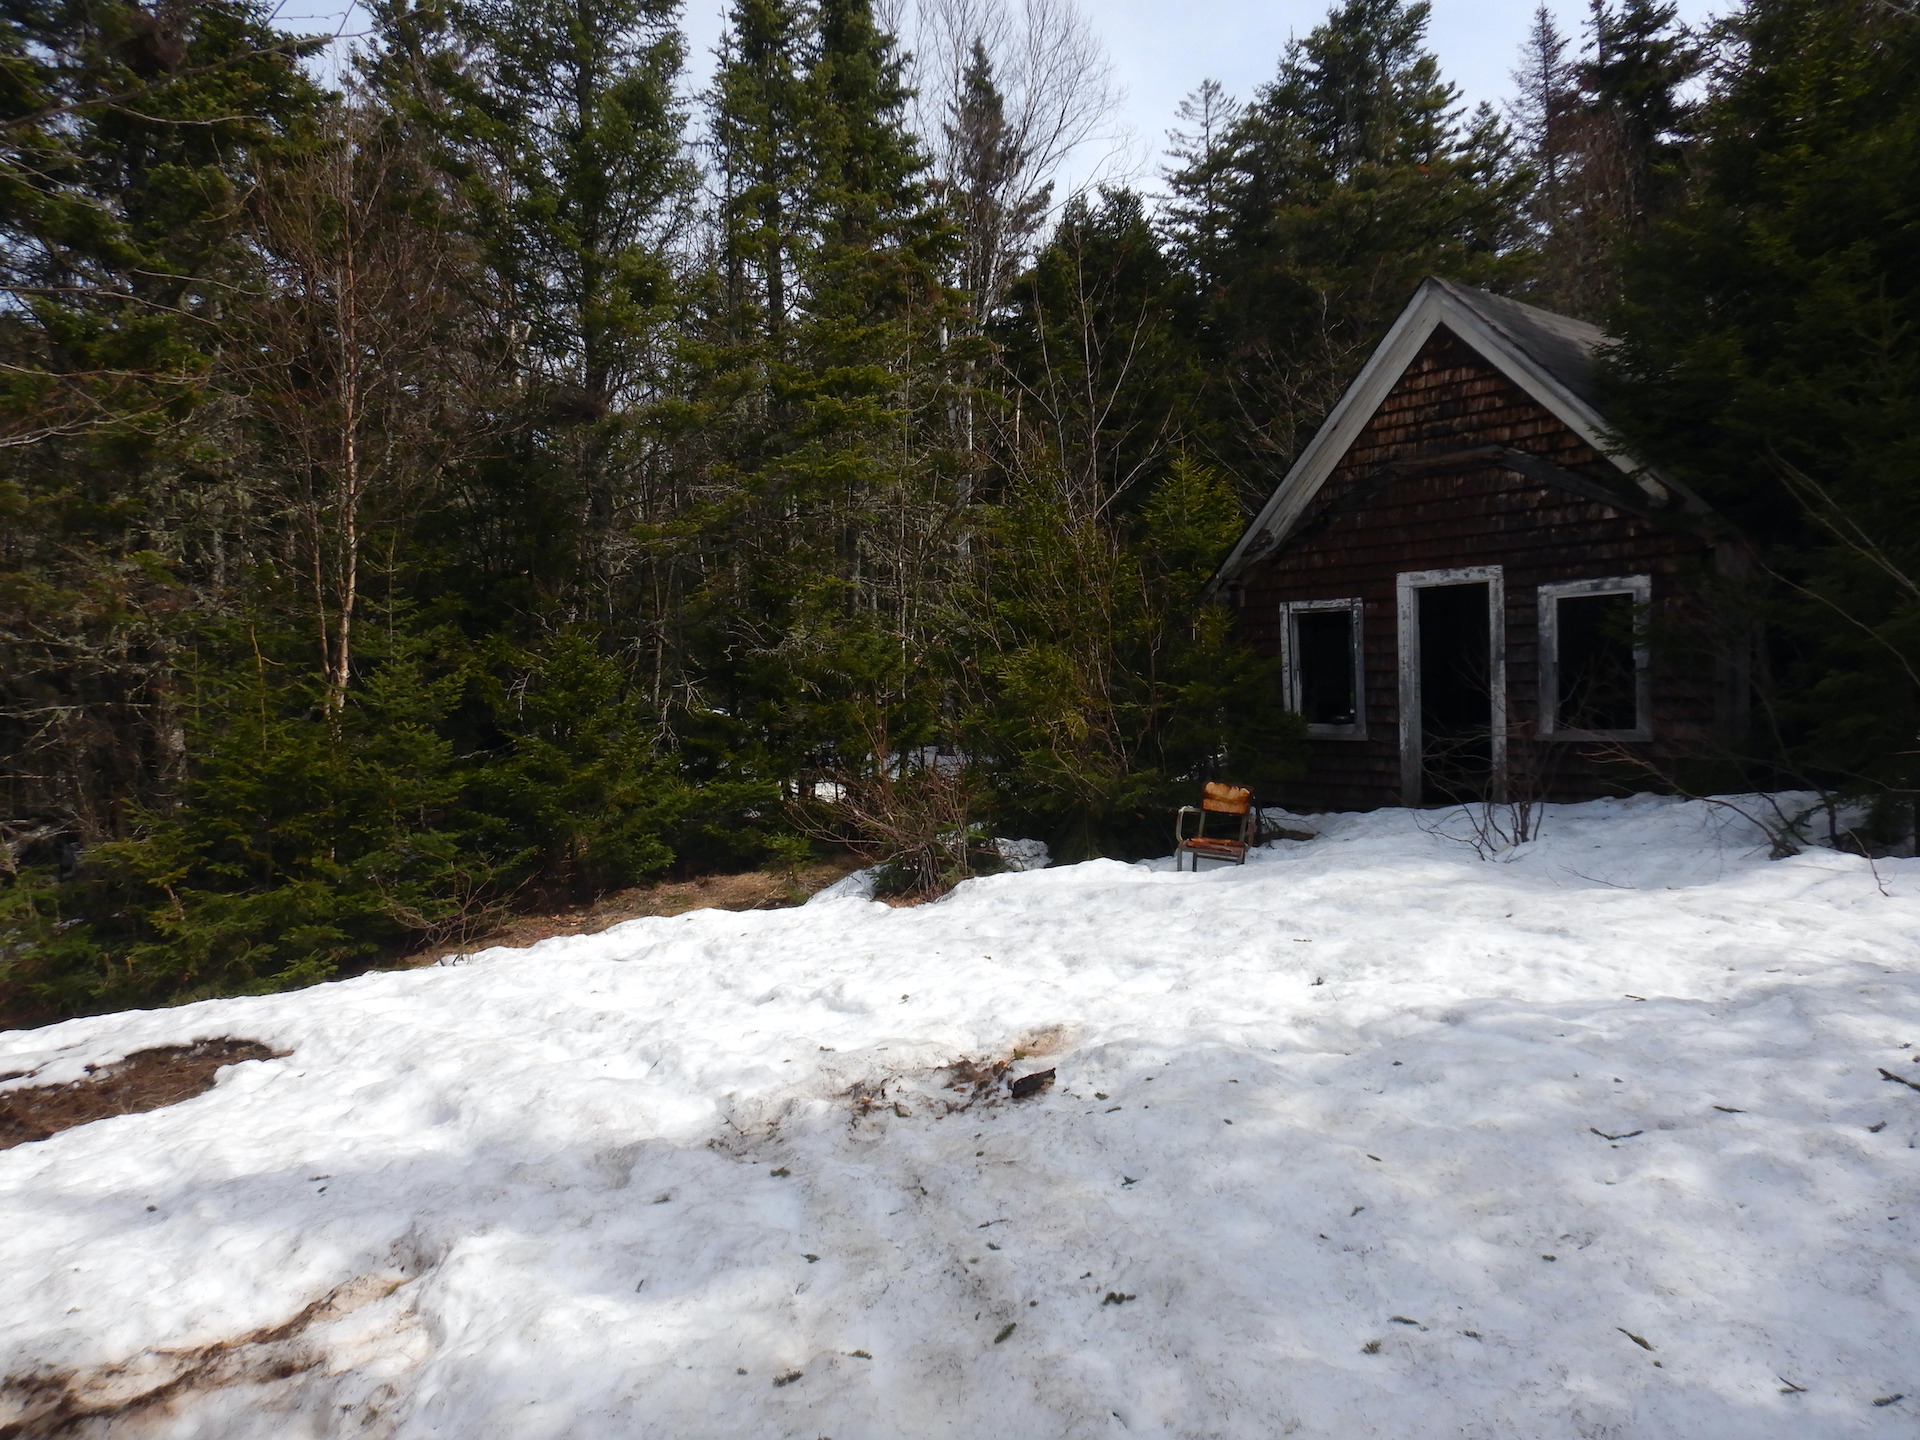 A derelict cabin in a forest. Wet, late season snow covered the bare area in front of the cabin. A mixed forest surround the cabin. The windows and door of the cabin is missing and the brick red lead paint is peeling from the outside.